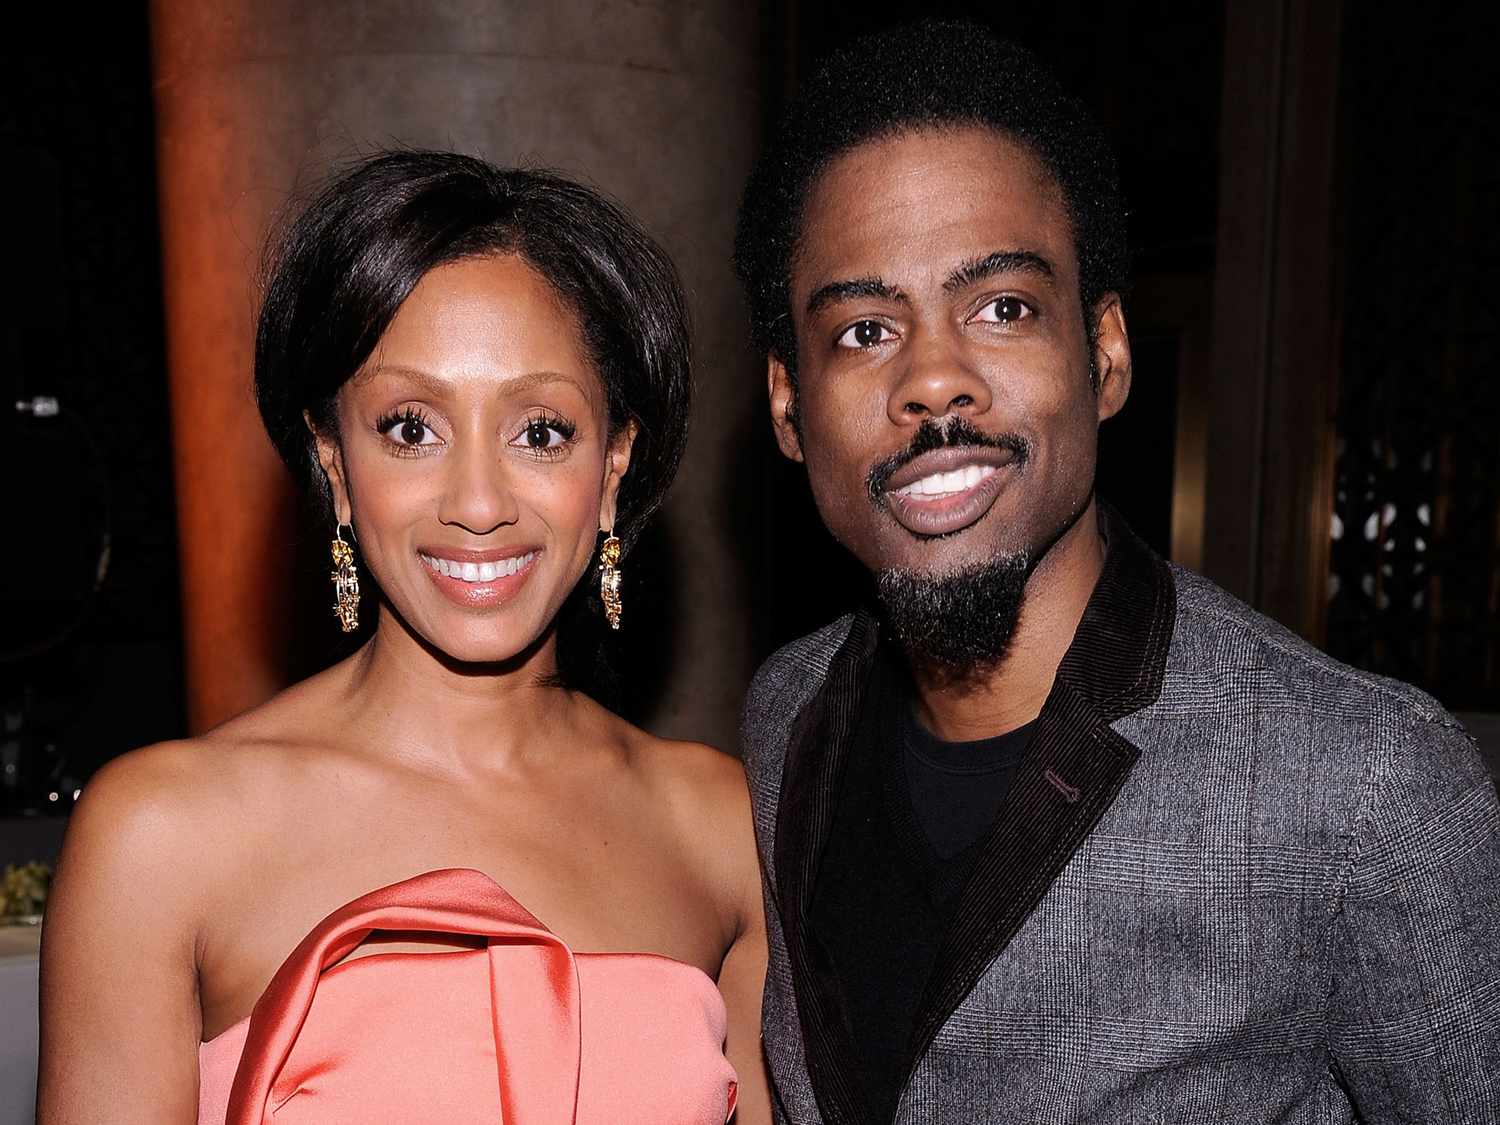 Chris Rock's ex-wife and him